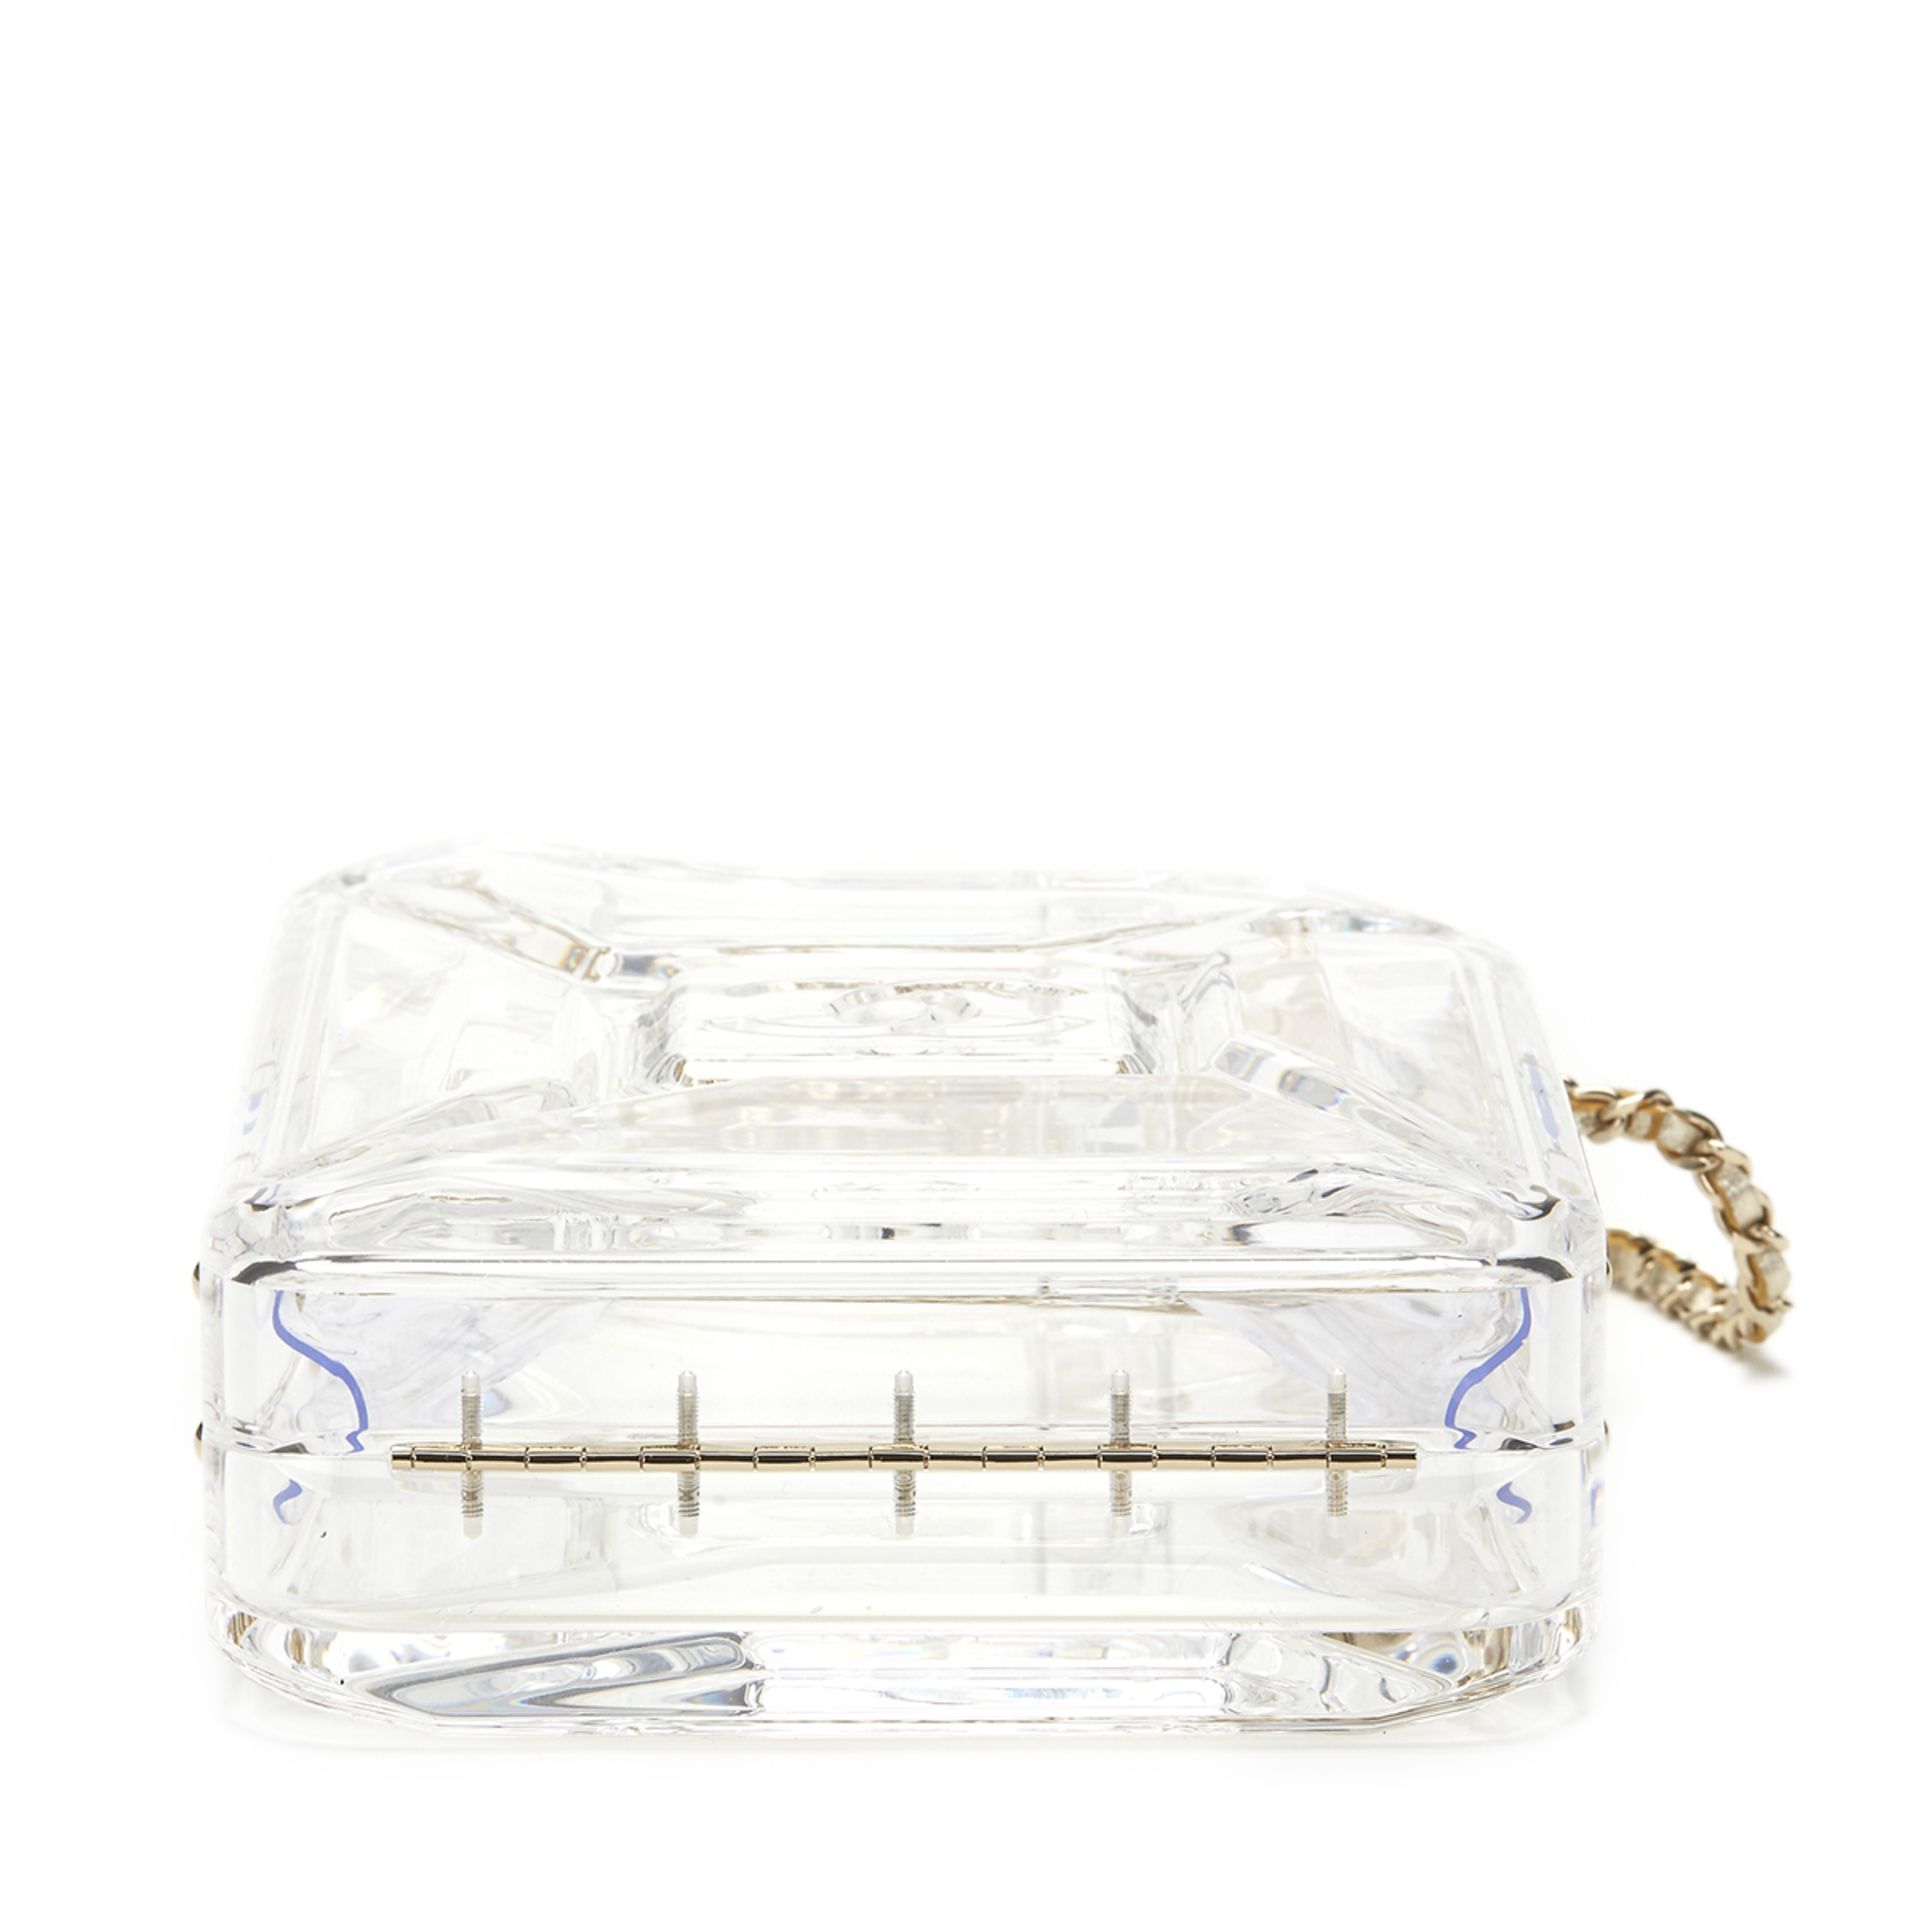 Chanel Gas Can Minaudiere - Image 3 of 13